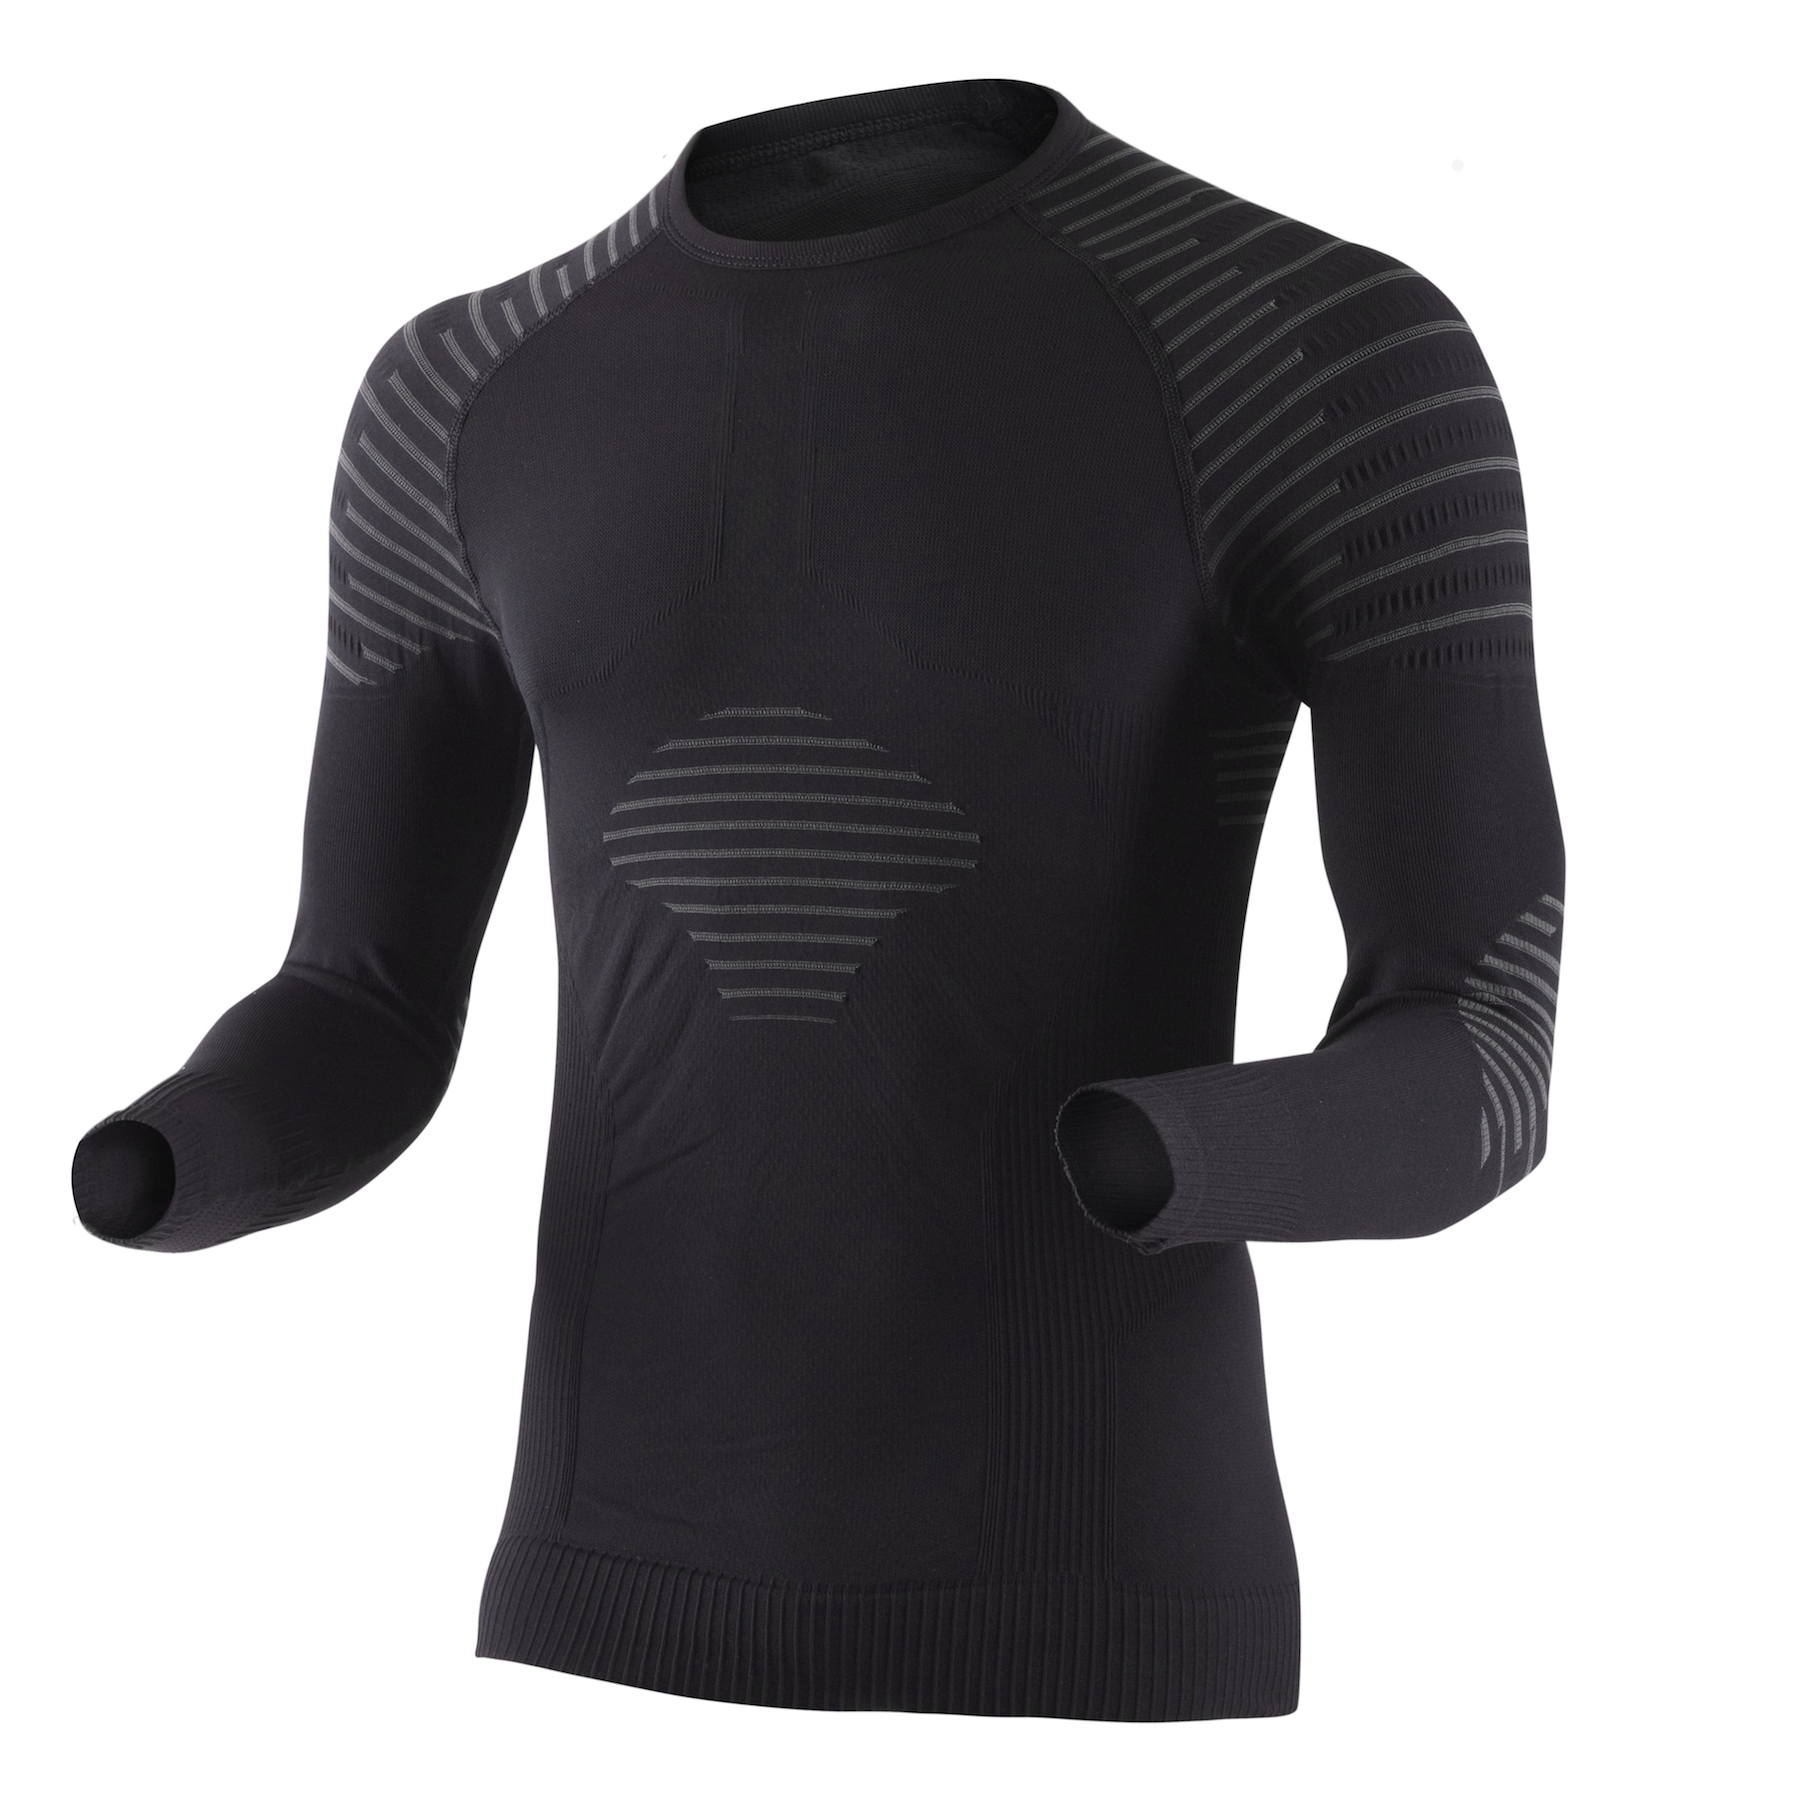 X-Bionic Invent Shirt long sleeves - Maillot homme | Hardloop